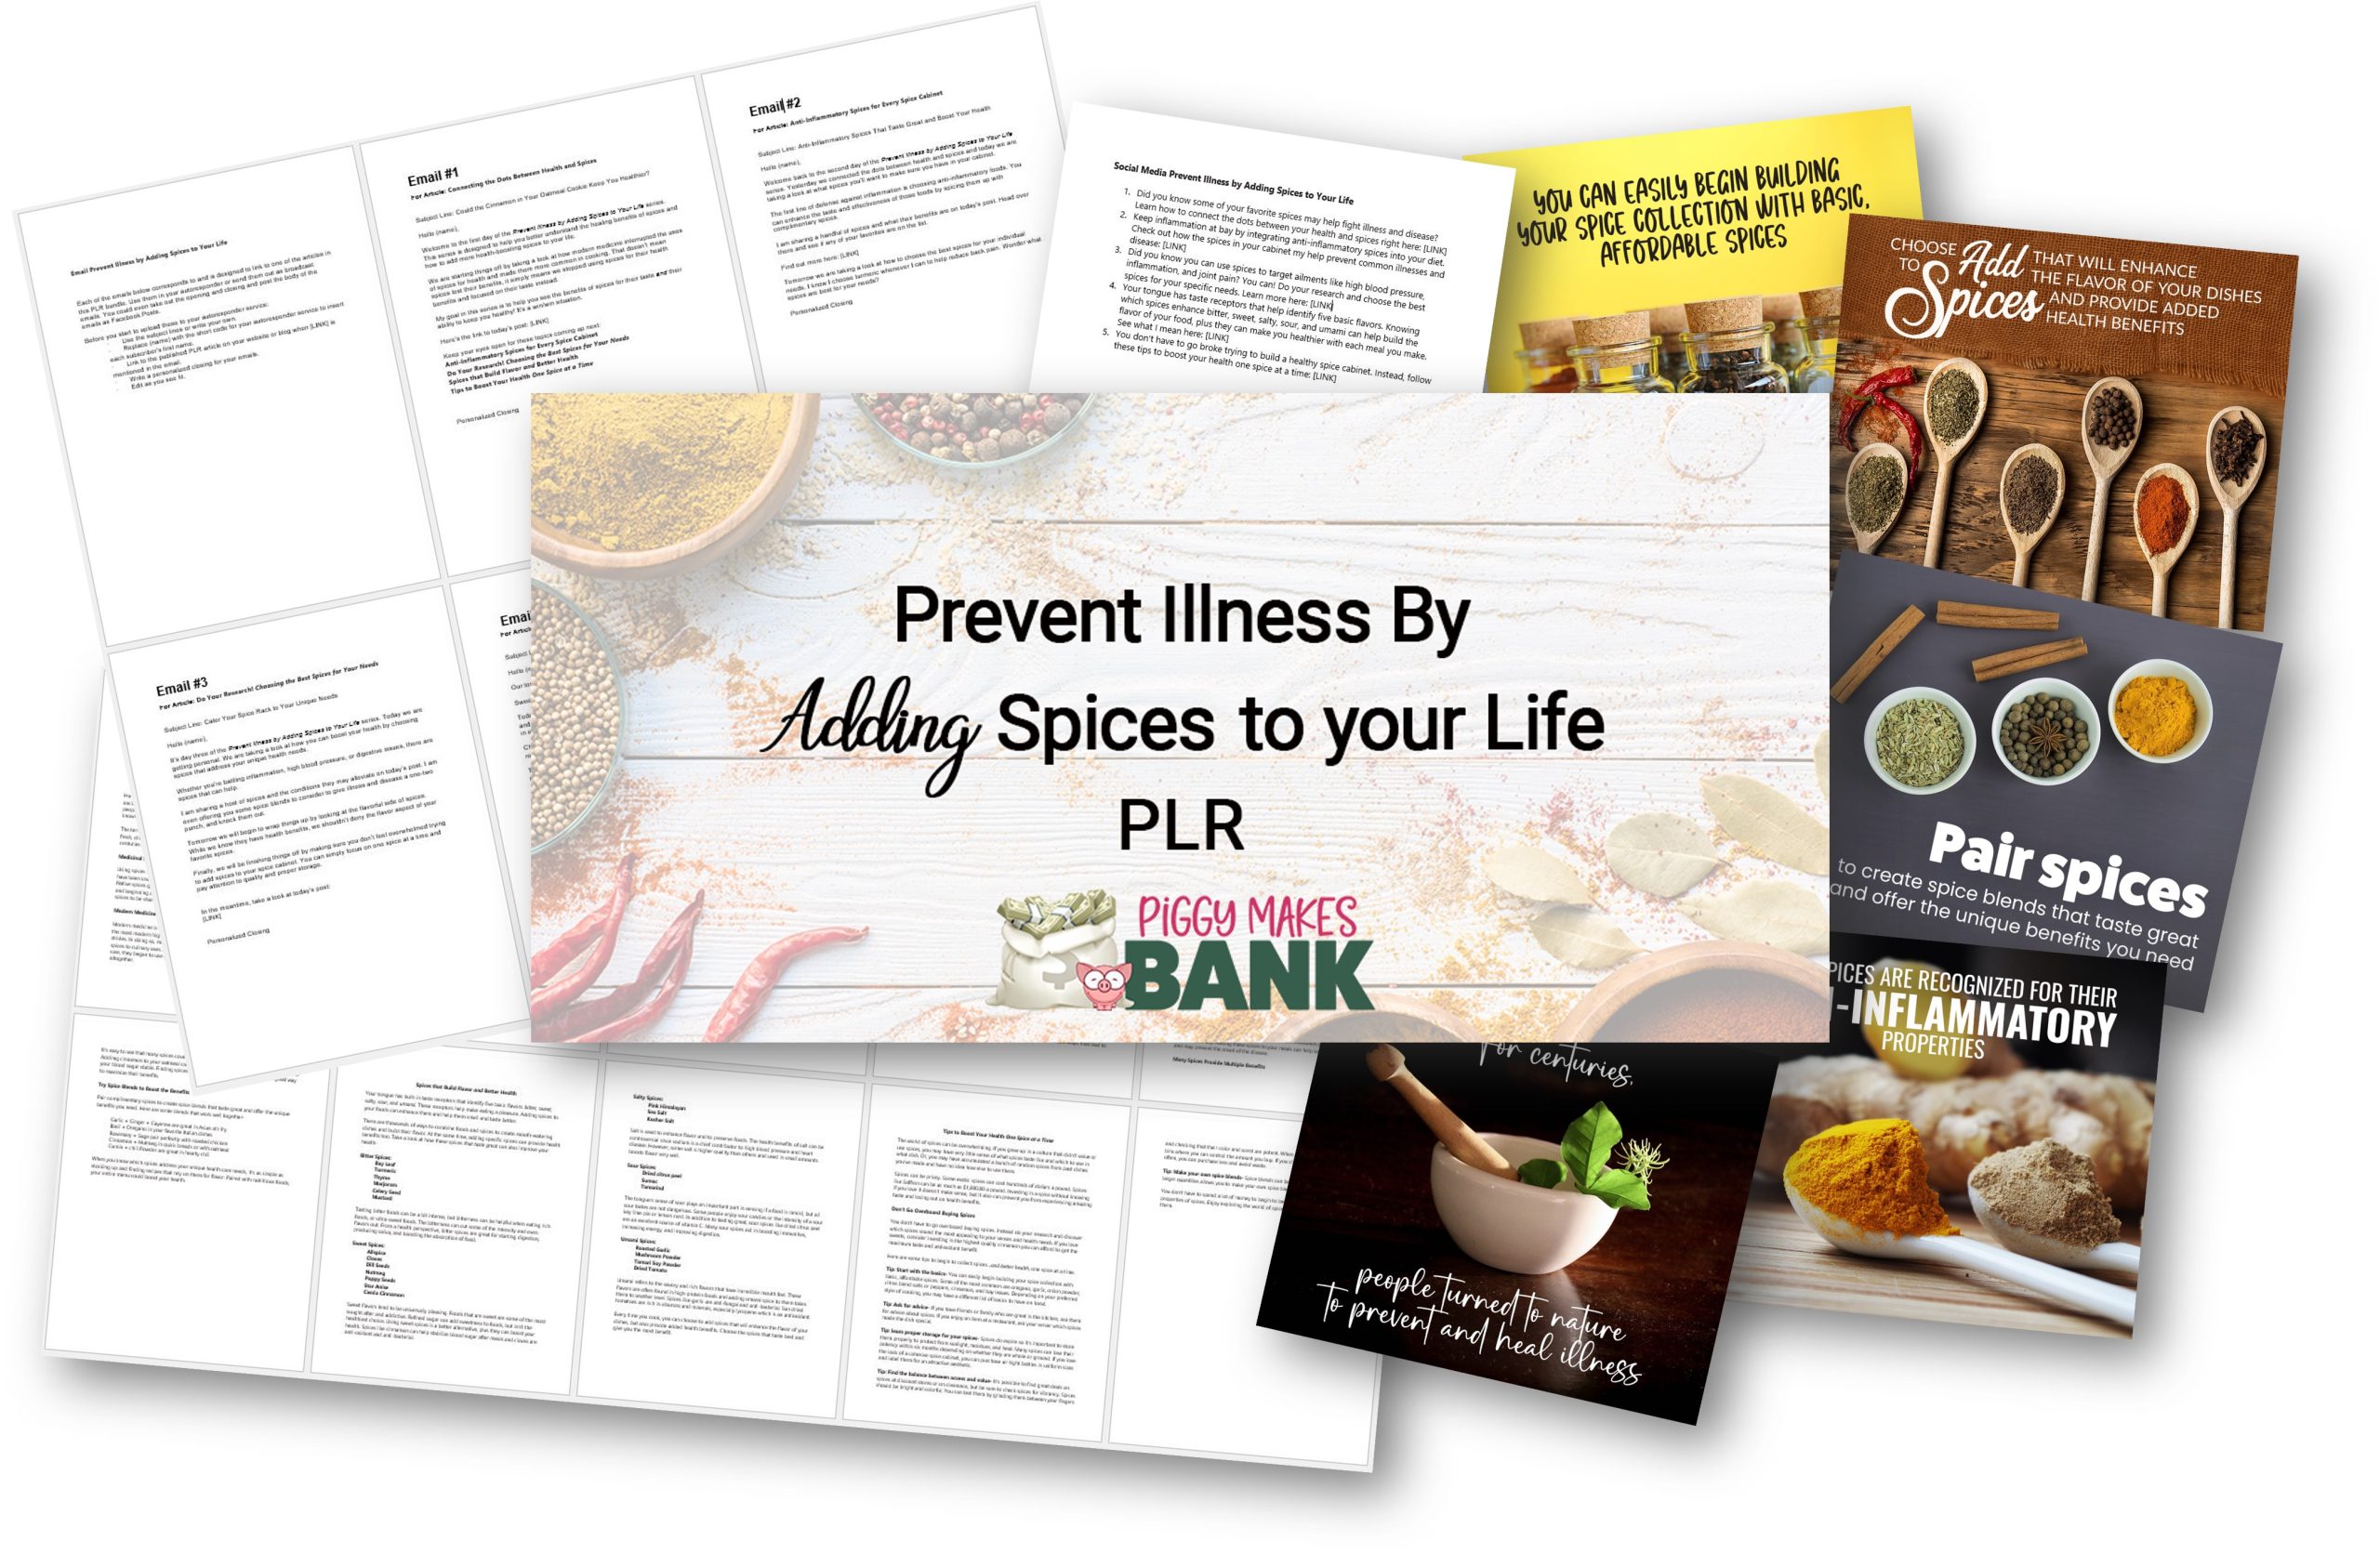 Preventing Illness by Adding Spices PLR